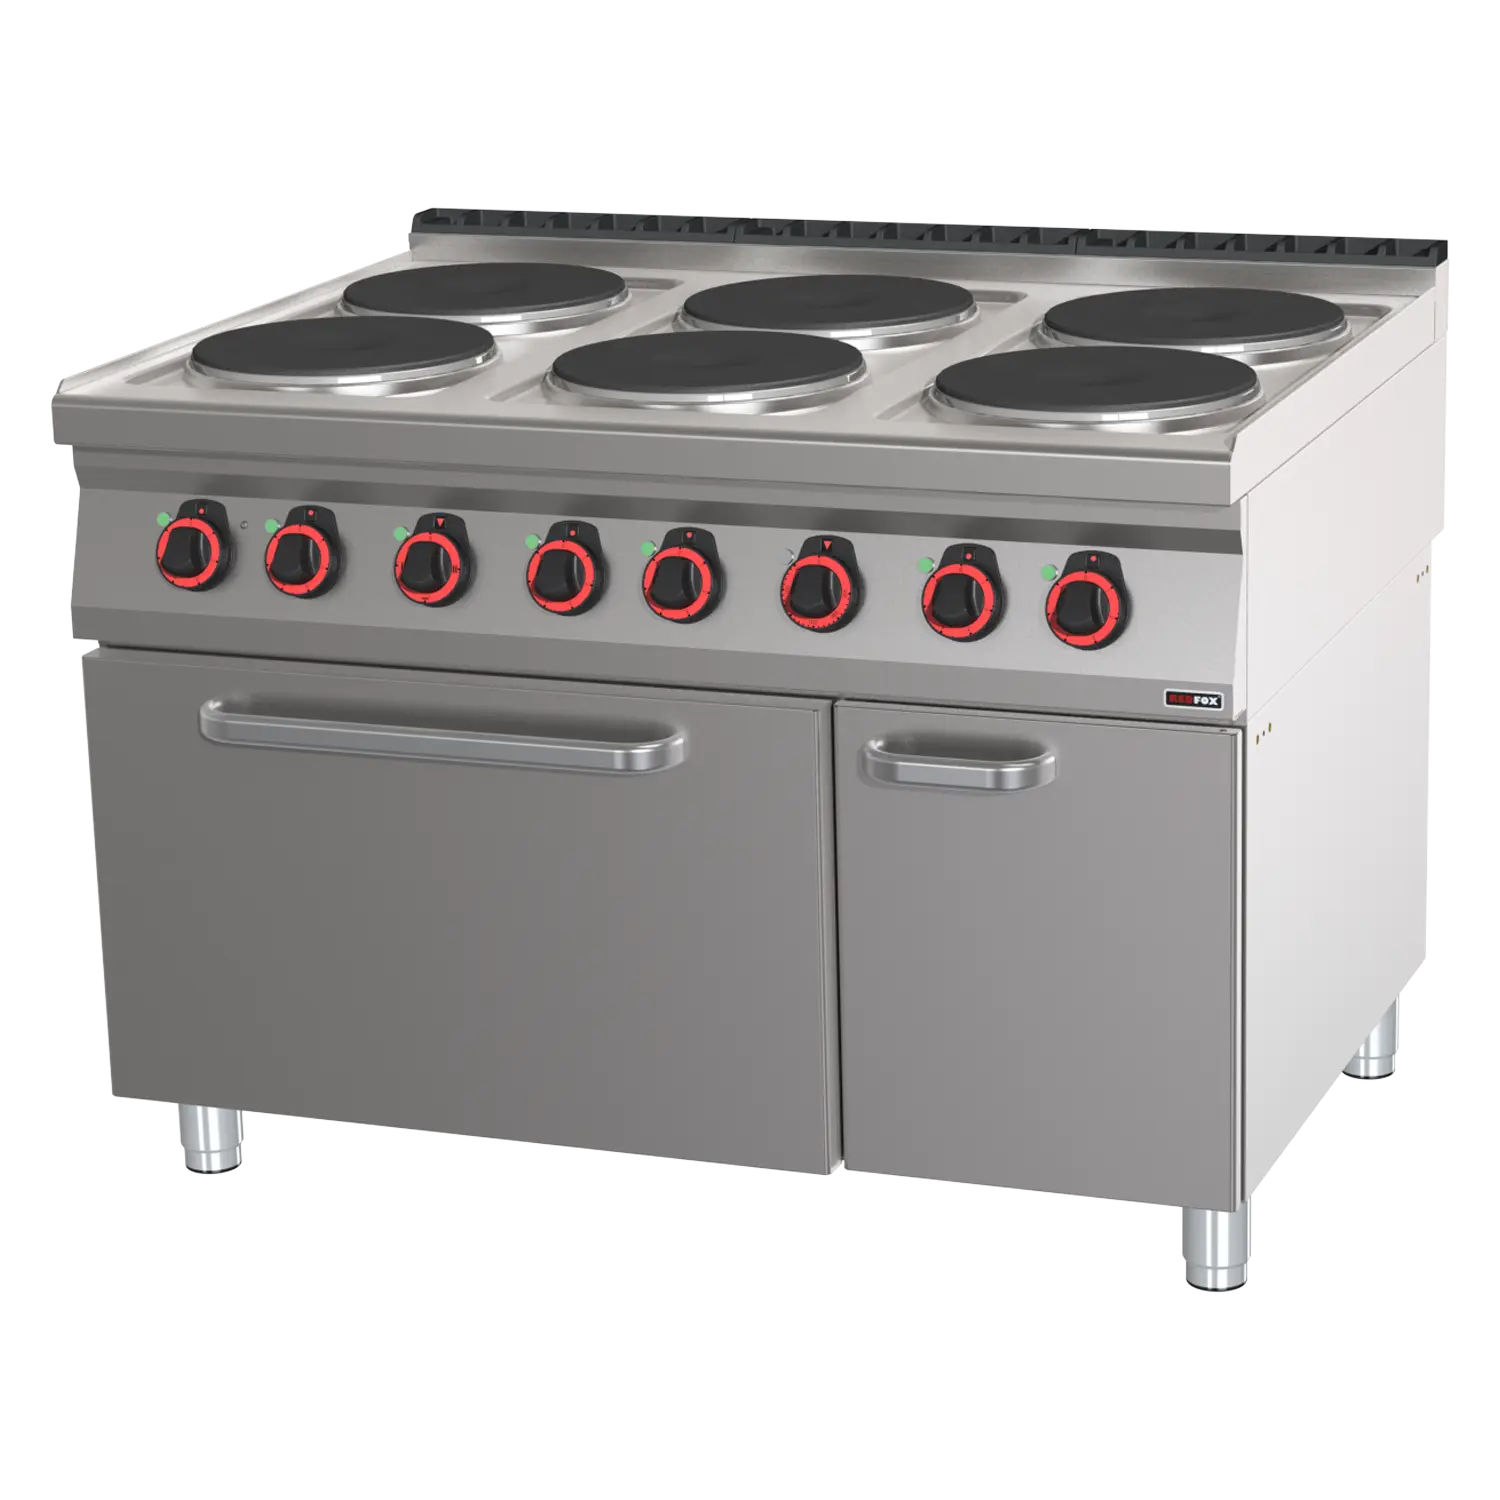 Cooking range electric 6x plates with oven GN 2/1 | REDFOX - SPT 90/120-21 E